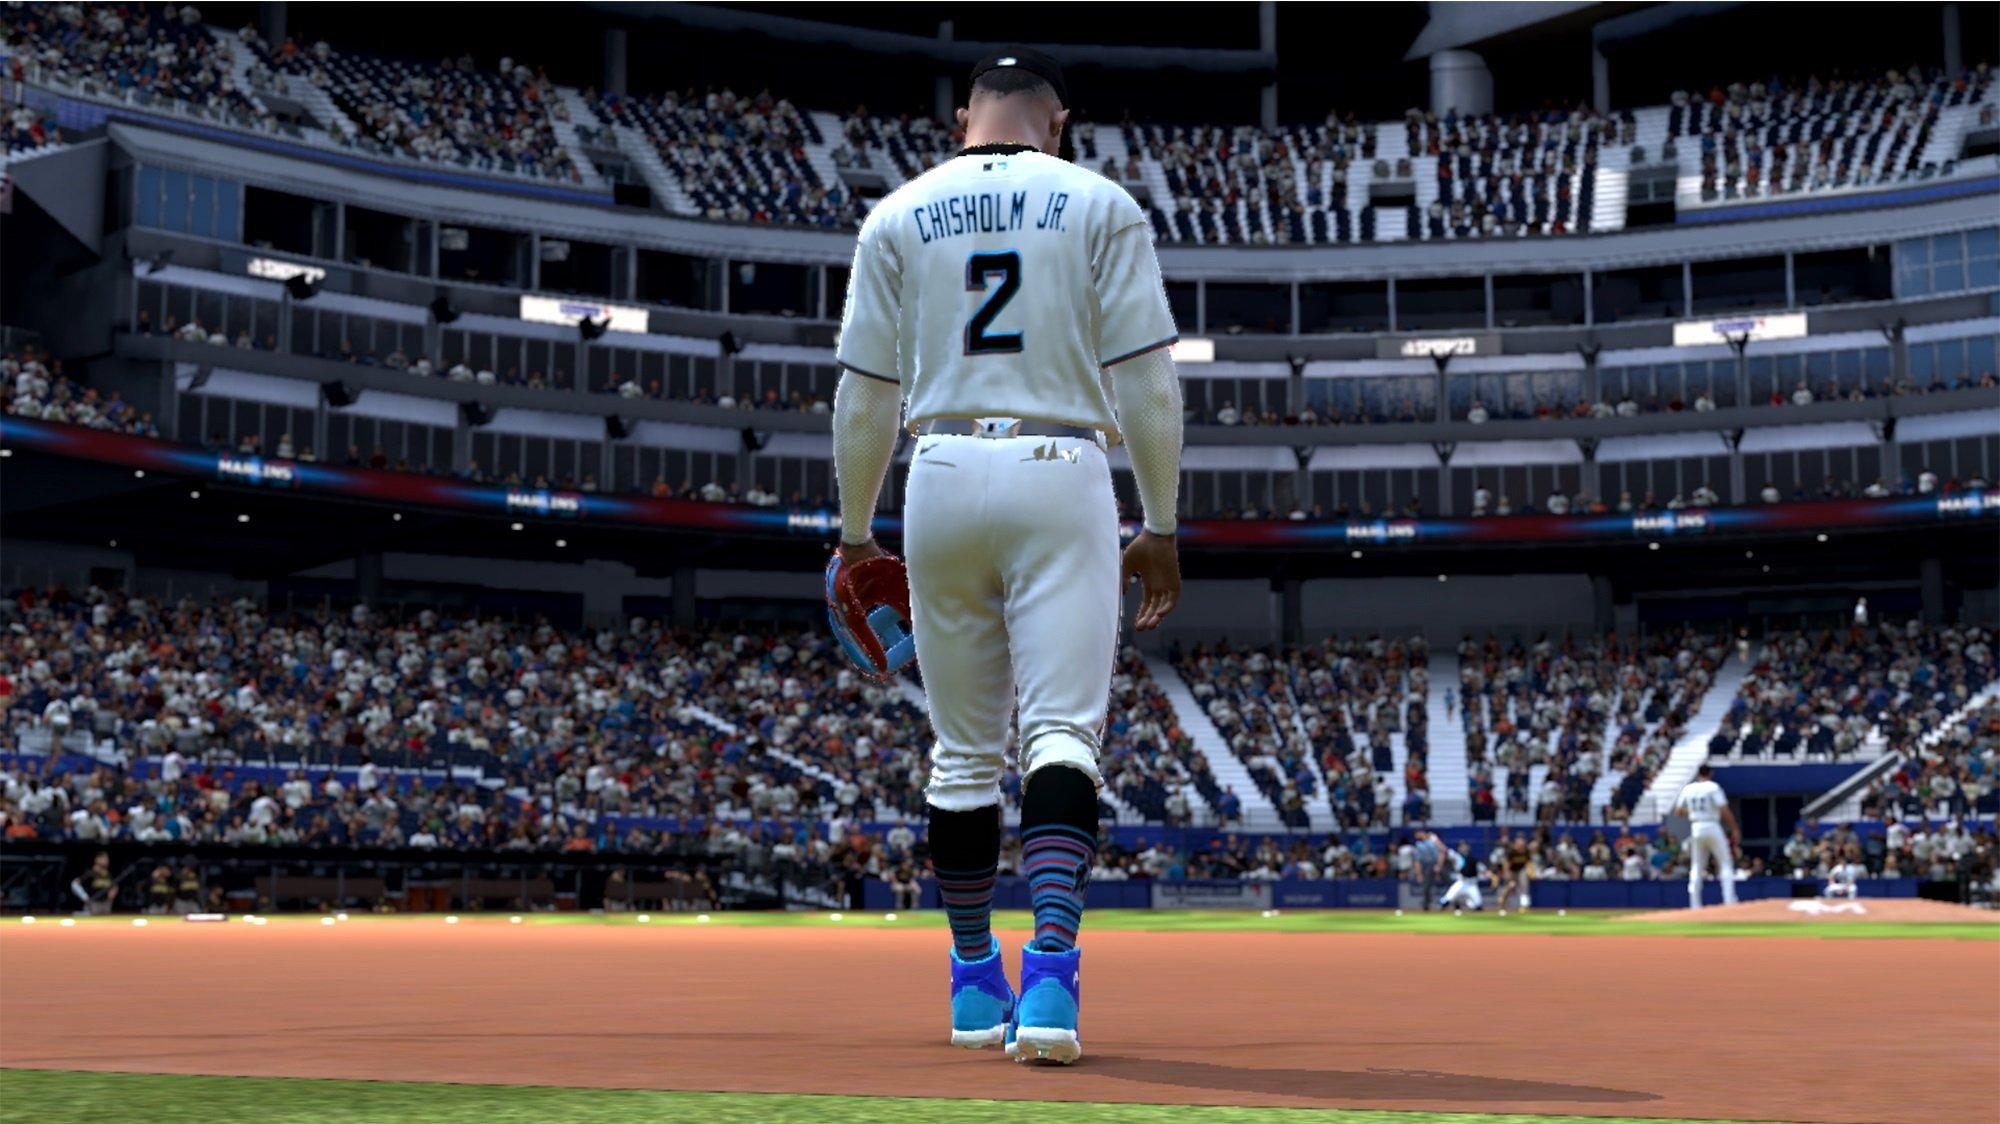 MLB The Show 23 - PlayStation 4 